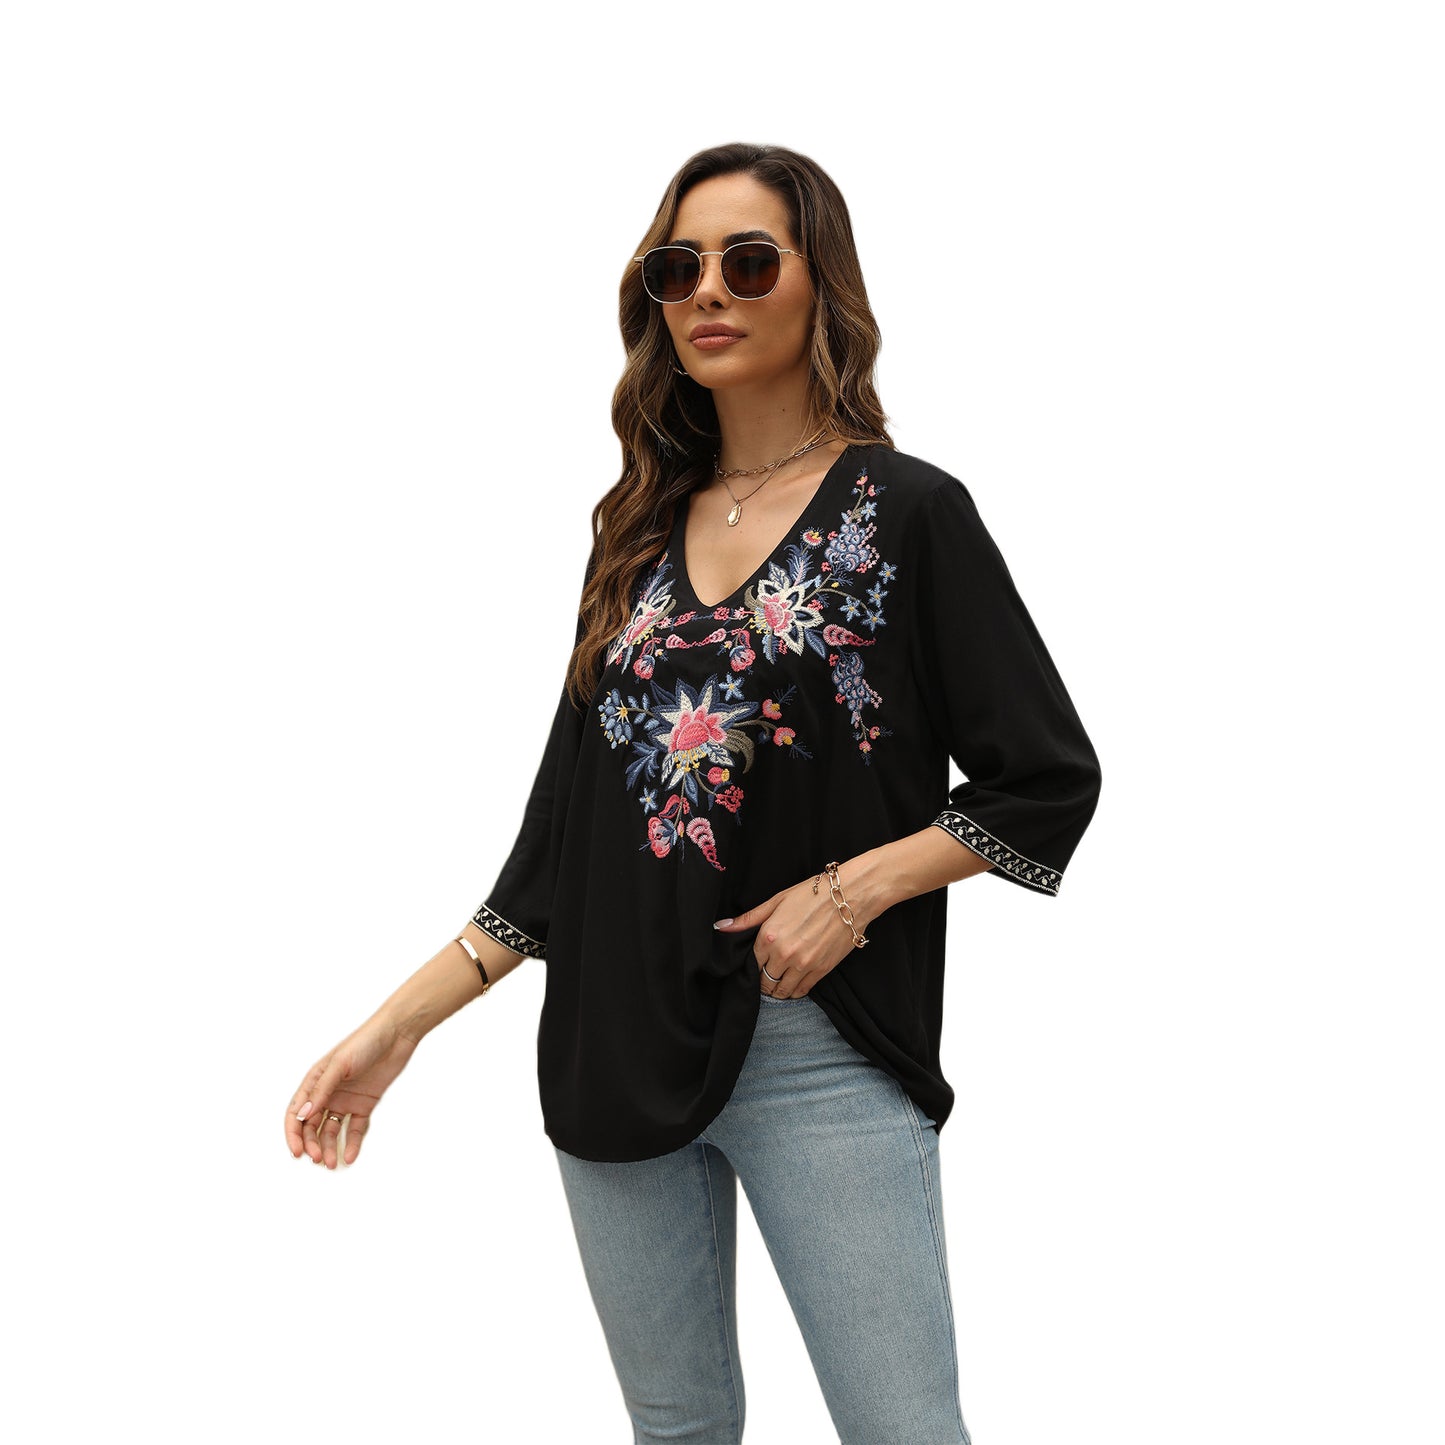 Women's V-neck Embroidered Top